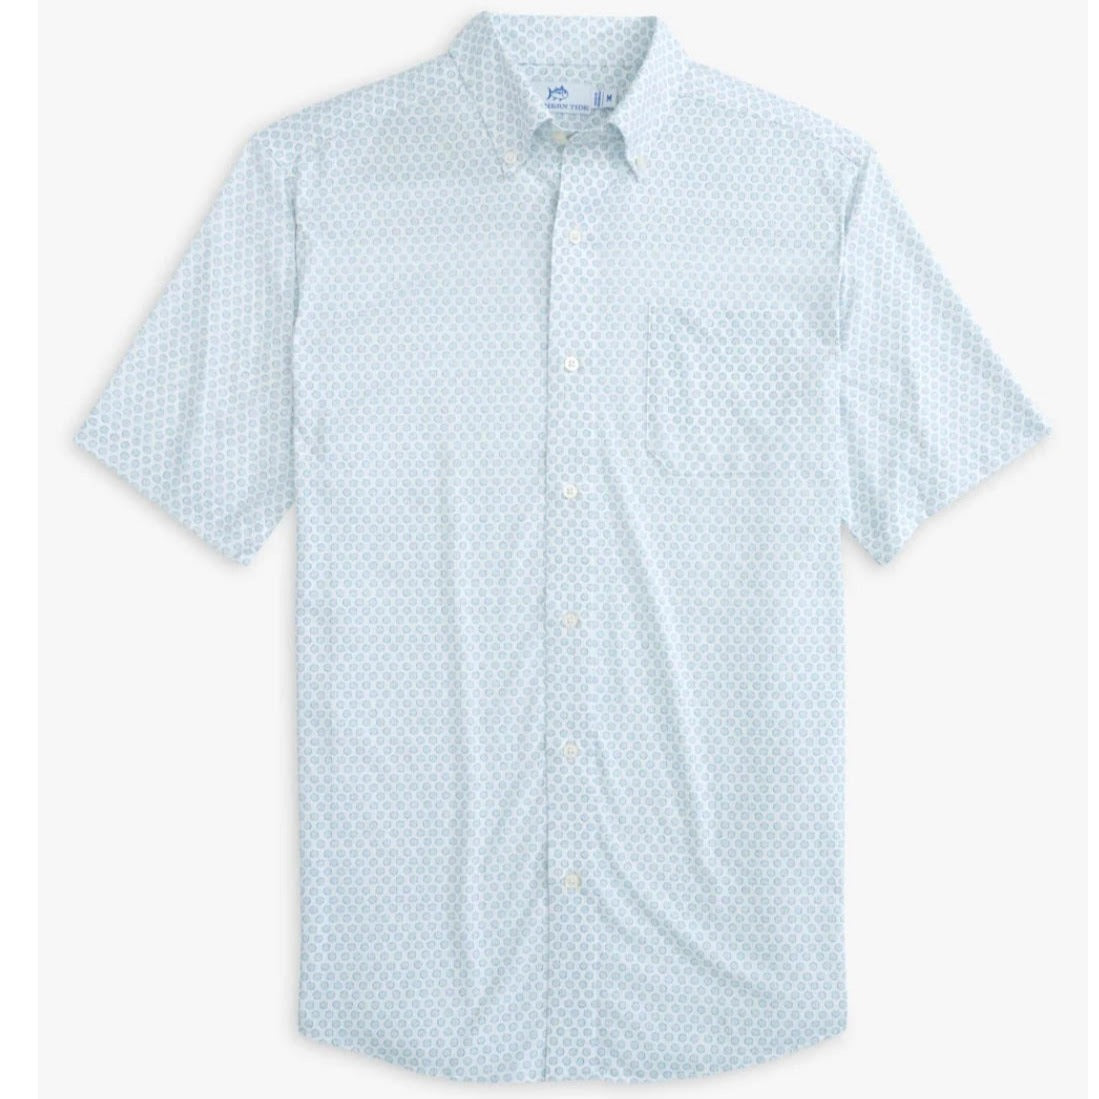 Properly Tied Offshore Fishing Shirt